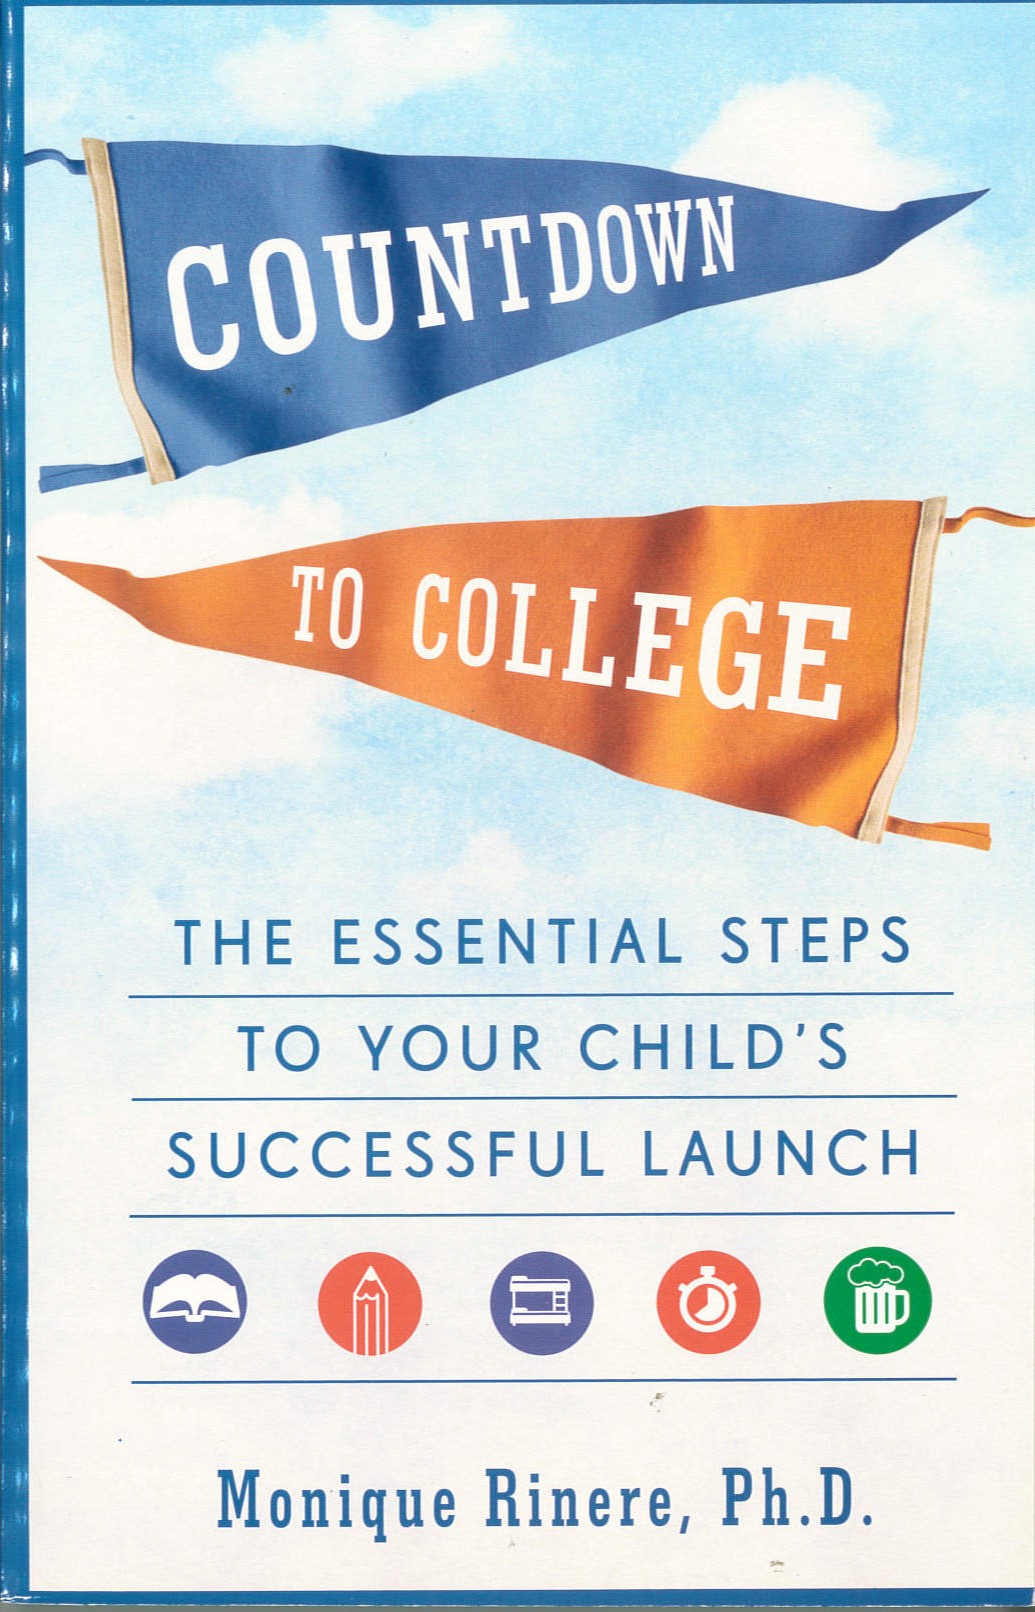 Countdown to college : the essential steps to your child